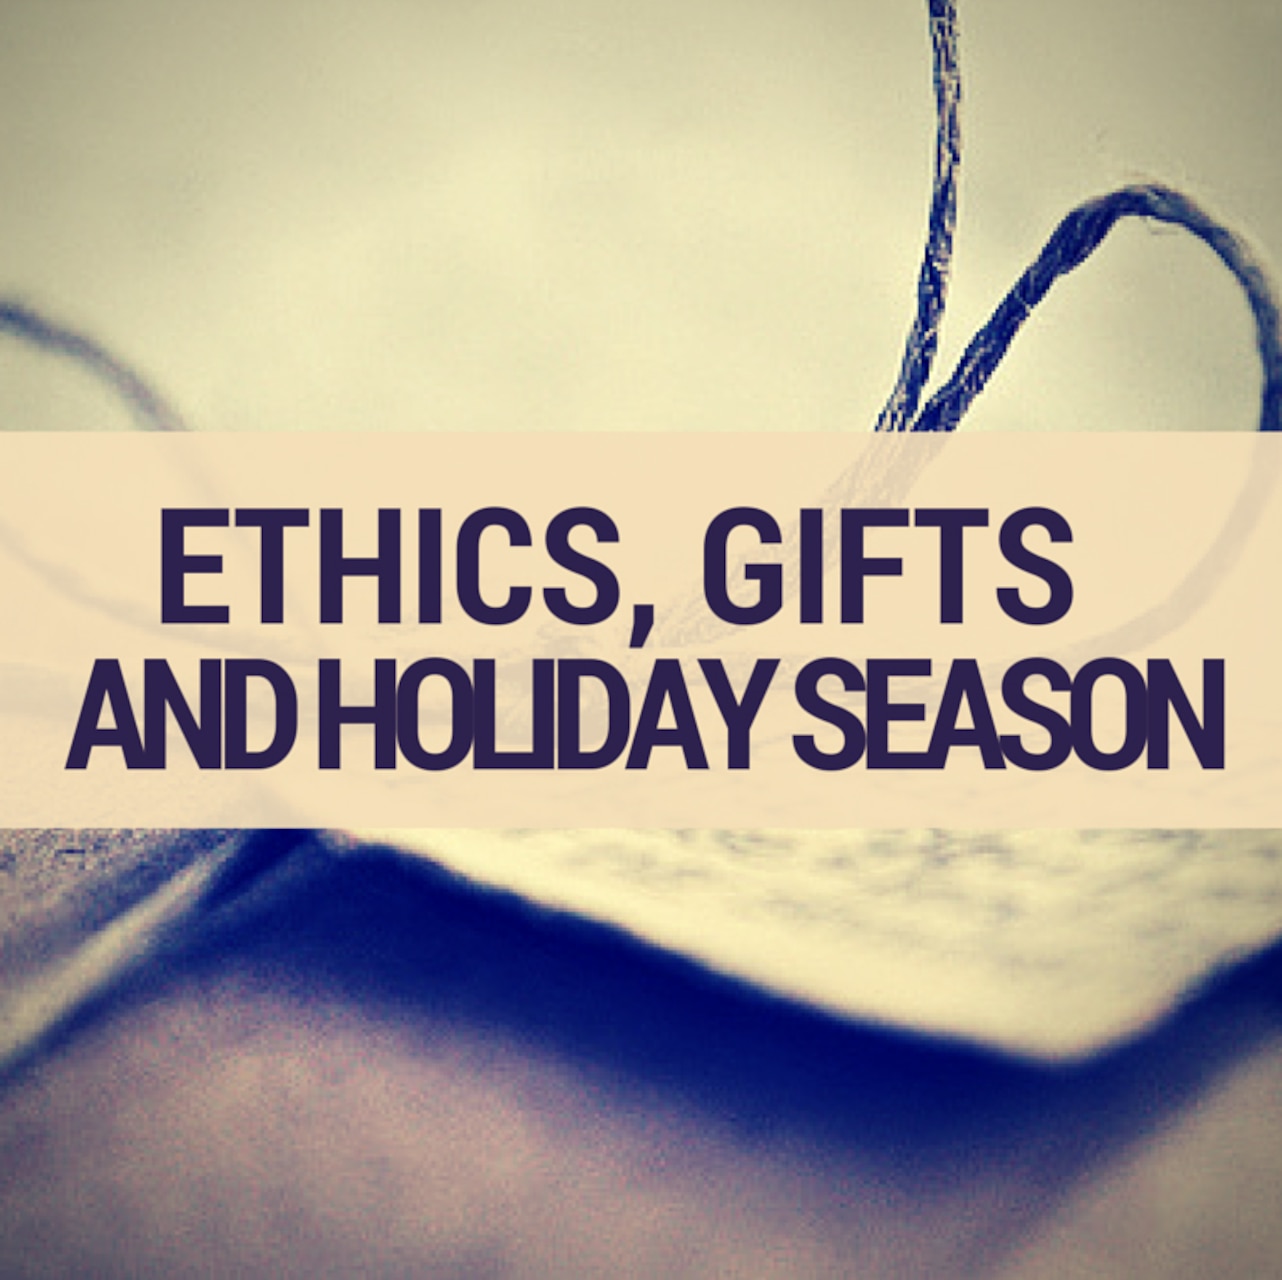 Legal Website - Ethics, Gifts and Holiday Season